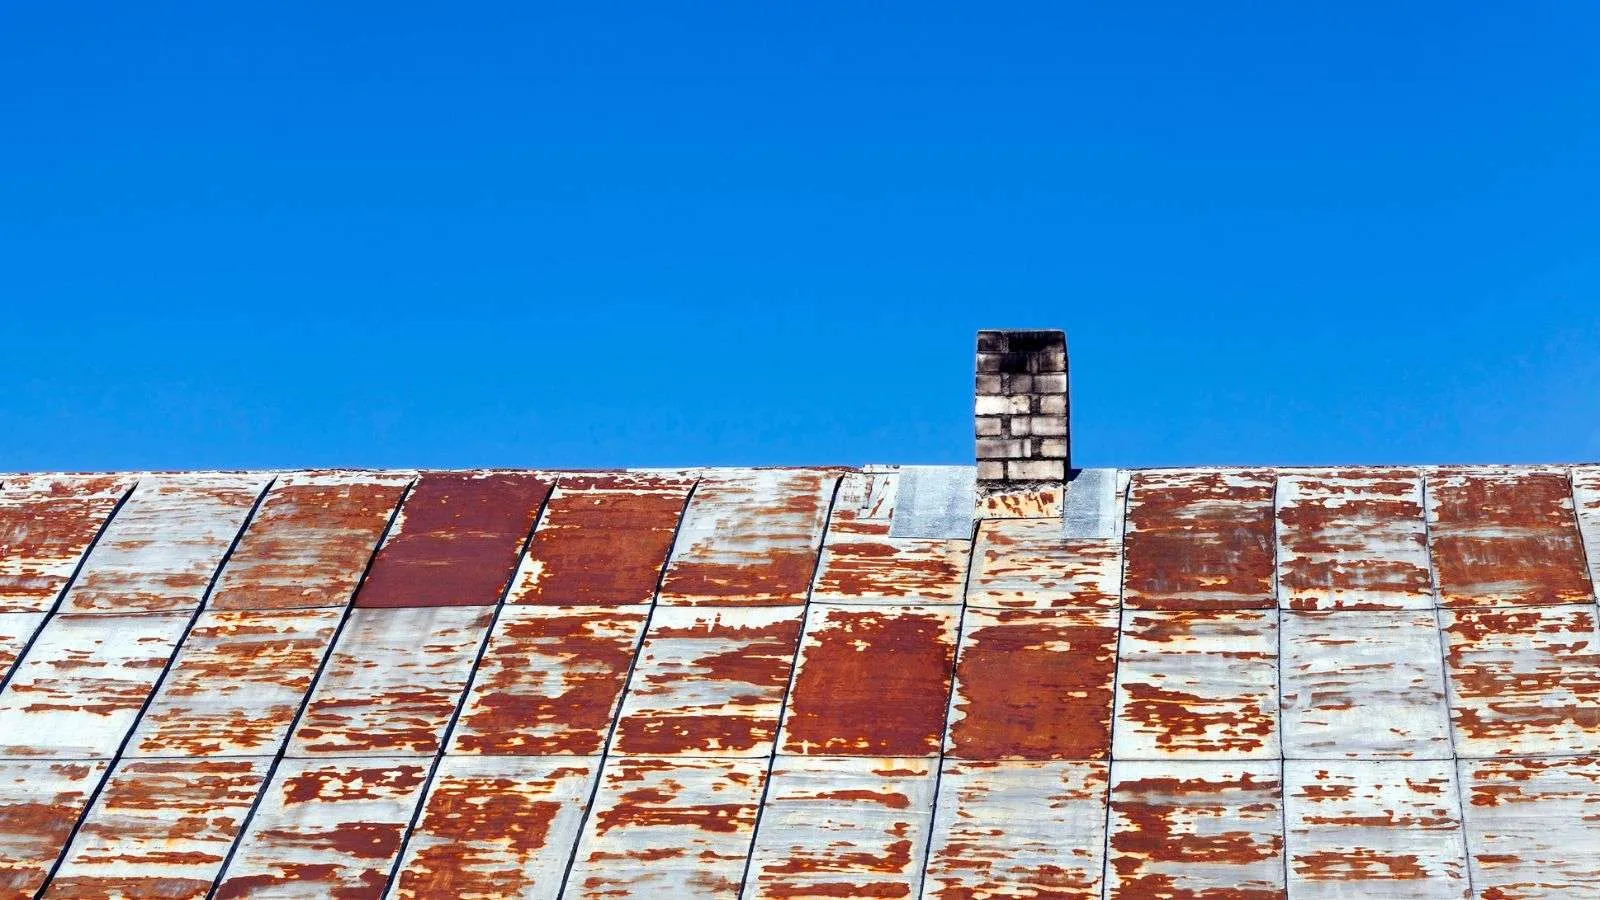 Proper roof maintenance is crucial to the longevity of any building, and handling rusty roofs is a challenge homeowners and maintenance crews often face. The ability to effectively seal such roofs depends on understanding the nature of rust and utilizing the right techniques and products. In this article, we will explore the key methods to properly seal your rusty roof, delve into why rust spreads and how to stop it, and discuss the pros and cons of various solutions, including liquid rubber sealants, silicone sealants, conversion spray treatments, and more. Top 5 Effective Methods to Properly Seal Your Rusty Roof 1. Clean and Treat the Rust Before sealing your rusty roof, you have to clean and treat the rusted areas properly. Start by removing any loose rust, debris, or old coatings using a wire brush or scraper. Next, apply a rust converter or inhibitor to halt the spread of rust. Rust converters chemically react with rust, turning it into a stable surface that can be painted over. This step sets up a solid foundation for the sealant and prevents further rusting. When applying the rust converter, make sure to follow the manufacturer's instructions carefully. Allow sufficient time for the converter to dry and cure before proceeding with the sealing process. 2. Use a High-Quality Waterproof Sealant To successfully seal a roof that has rust, you must use the correct waterproof sealant. Look for a high-quality sealant specifically designed for metal roofs. Opt for sealants with excellent adhesion to metal surfaces and long-lasting waterproofing properties. Silicone-based or polyether-based sealants are commonly recommended for their durability and resistance to moisture and UV exposure. Apply the sealant generously to cover all areas of concern, such as seams, joints, flashing, and any other vulnerable spots where water may penetrate. Use a brush, roller, or sprayer to check for even coverage and proper adhesion. 3. Apply a Reinforcing Fabric To enhance the durability and strength of the sealant, consider incorporating a reinforcing fabric into the sealing process. Reinforcing fabrics, such as polyester or fiberglass mesh, provide an extra layer of protection and help prevent cracking or splitting of the sealant over time. Apply the fabric over the wet sealant and then apply another layer of sealant on top to encapsulate the fabric. Make sure the reinforcing fabric is fully embedded in the sealant, leaving no exposed areas. This will help create a seamless and robust barrier against water infiltration. 4. Consider a Roof Coating System Applying a roof coating system is an effective way to not only seal your rusty roof but also provide additional protection against environmental factors. Roof coatings are available in various formulations, including acrylic, silicone, or elastomeric coatings. These coatings can extend the lifespan of your roof by offering superior waterproofing, UV resistance, and thermal insulation properties. Before applying the roof coating system, thoroughly clean the roof surface, removing any dirt, loose paint, or debris. Follow the manufacturer's instructions regarding application techniques, the number of coats required, and drying and curing times for optimal results. 5. Regular Maintenance and Inspections Once you have successfully sealed your rusty roof, it is essential to perform regular maintenance and inspections to uphold its continued effectiveness. Routinely inspect your roof for any signs of damage, such as cracks, peeling sealant, or areas of rust recurrence. Promptly address any issues by resealing or repairing as necessary to prevent water intrusion. Schedule regular roof inspections at least twice a year and after severe weather events. Clear any debris that accumulates on the roof promptly to prevent water pooling or damage to the sealant. Maintain proper drainage systems to make certain water flows efficiently off the roof surface. Why Rust Spreads and How to Stop It Rust spreads when moisture and oxygen come into contact with iron or steel surfaces, creating a chemical reaction known as oxidation. This process causes the formation of iron oxide, commonly known as rust. Once rust starts to develop, it can continue to spread if left untreated, leading to structural damage and compromised integrity of the affected material. To stop the spread of rust, it is essential to eliminate the conditions that promote its formation. This can be achieved by removing any existing rust through thorough cleaning and then applying protective measures such as rust converters or inhibitors. These products chemically react with the rust, converting it into a stable surface that can be sealed or painted over. Applying a high-quality sealant or coating specifically designed for metal surfaces acts as a barrier, preventing further moisture and oxygen exposure. Finding and fixing any areas susceptible to rust formation before it spreads and causes major damage requires regular maintenance, inspections, and quick repairs. The Problems with Using Flex Seal on Rusty Roofs Inadequate Adhesion: One problem with using Flex Seal on rusty roofs is that it may have inadequate adhesion to the rusty surface. Flex Seal is primarily designed for sealing cracks, leaks, and gaps rather than bonding to corroded metal. Without proper adhesion, the sealant may not effectively create a watertight barrier, which could lead to continued water infiltration. Lack of Rust Prevention: While Flex Seal may temporarily seal the surface and prevent immediate leaks, it does not address the underlying issue of rust formation. Rust will continue to spread unless the rust is eliminated and proper preventive measures are taken. Flex Seal alone does not provide the rust conversion or inhibition properties needed to stop rust from further deteriorating the metal surface. Limited Durability: Flex Seal is typically a temporary solution and may not provide long-lasting durability when applied to rusty roofs. Over time, exposure to weather conditions, UV rays, and temperature fluctuations can cause the sealant to degrade or peel off, compromising its effectiveness as a long-term solution for rusted roofs. Compatibility Issues: Flex Seal may not be compatible with all types of roofing materials or coatings. It is essential to make sure the sealant is suitable for your specific roof material and can adhere properly without causing any adverse reactions or damage. Failure to consider compatibility issues could result in further complications and potential harm to the roof. Potential for Hidden Damage: Applying Flex Seal directly over rusted areas without addressing the underlying rust issue can lead to hidden damage. The rust may continue to corrode the metal beneath the sealant, causing structural weaknesses and compromising the integrity of the roof. This hidden damage can worsen over time and result in costly repairs or even roof failure. A Look at Liquid Rubber Seam Tape as a Solution Liquid rubber seam tape is a viable solution for sealing rusty roofs and addressing potential leak points. This self-adhesive tape is specifically designed to provide a watertight seal around vents, flashing, and other protrusions on the roof. It offers excellent adhesion to various surfaces, including metal, and provides a flexible and durable barrier against water infiltration. Liquid rubber seam tape is easy to apply and can be used in conjunction with other sealing methods for added protection. By applying the tape over vulnerable areas, it helps prevent water from seeping through gaps and joints, reducing the risk of leaks and further rust formation. This solution is particularly effective when combined with proper rust treatment and other preventive measures to guarantee a comprehensive approach to sealing rusty roofs. Using Liquid Rubber Waterproof Sealant for Rusty Roofs Liquid rubber waterproof sealant is a highly effective solution for sealing rusty roofs and preventing water penetration. This type of sealant is specifically designed to adhere well to metal surfaces and offers excellent moisture and UV protection. It can be applied over cleaned and treated rusty areas, creating a durable barrier that helps prevent further rusting and inhibits water intrusion. Liquid rubber sealant can be applied using a brush, roller, or sprayer, allowing for easy and even coverage. Multiple coats can be applied, with sufficient drying time between each coat, to establish a robust and long-lasting seal. Adding a coat of liquid rubber waterproof sealant to your rusty roof will increase its durability, lengthen its lifespan, and protect it from leaks and water damage. High-Solids Polyether and Silicone Sealants for Rusty Roofs High-solids polyether and silicone sealants are preferred choices for sealing rusty roofs due to their excellent adhesion to metal surfaces and superior moisture resistance. These sealants offer durable and long-lasting protection against water infiltration and are known for their ability to withstand UV exposure. Silicone sealant, in particular, adheres well to metal and other common construction materials, making it an ideal choice for sealing rusty roofs. It provides a flexible and watertight seal that can withstand extreme weather conditions. Polyether sealants also offer similar benefits, with the added advantage of being paintable, allowing for further customization and aesthetic appeal. To effectively seal the rusty areas of your roof, you can use high-solids polyether or silicone sealants. This will prevent leaks and further rusting, and it will also offer long-term protection and durability. Removing Rust with Conversion Spray Treatment Conversion spray treatment is an effective method for removing rust from a rusty roof and preventing its further spread. This treatment works by chemically converting the rust into a stable compound that bonds with the surface, effectively halting the rusting process. The spray contains specialized chemicals that react with the rust, transforming it into a solid, protective layer. This results in a clean metal surface that can be further treated or sealed. Conversion spray treatments are easy to use and typically require minimal preparation. They can be applied directly to the rusted areas using a spray bottle or a pump sprayer. Once the conversion spray is applied, it needs to be allowed sufficient time to react and dry before proceeding with any sealing or coating methods. To lay the groundwork for long-lasting repairs, use conversion spray treatments to efficiently remove rust from your roof, prep the surface for additional treatments, and stop the rust from spreading. What to Know About Replacing Fasteners in a Rusty Roof Identify Loose or Damaged Fasteners: When replacing fasteners on a rusty roof, start by identifying any loose or damaged fasteners. Inspect the roof carefully, paying attention to areas where fasteners are used, such as seams, flashing, or attachments. Loose or damaged fasteners can contribute to water infiltration and further rusting. Choose corrosion-resistant fasteners. If you want your roof repairs to last on a rusty roof, you need to use fasteners that are resistant to corrosion. Opt for corrosion-resistant fasteners made from materials like stainless steel or galvanized steel. These materials are less prone to rusting and offer better durability in harsh weather conditions. Remove Old Fasteners: Before installing new fasteners, remove the old ones using appropriate tools like a screwdriver or wrench. Make sure all remnants of the old fasteners are completely removed to establish a clean and secure attachment point for the new fasteners. Follow the Manufacturer's Guidelines: When replacing fasteners, it is essential to follow the manufacturer's guidelines and specifications for proper installation. Pay attention to recommended torque settings, screw lengths, and any specific instructions provided. Adhering to these guidelines allows for optimal performance and reduces the risk of damage to the roof. Consider Professional Assistance: Replacing fasteners in a rusty roof can be a challenging task, especially if extensive rusting or roof damage is present. If you are unsure about your ability to perform the replacement correctly, consider seeking professional assistance from a roofing expert. They have the knowledge, experience, and tools to verify proper fastener replacement and address any underlying issues effectively. When to Consider Replacing the Entire Metal Roof Extensive Rust Damage: When the metal roof exhibits extensive rust damage that cannot be effectively repaired or sealed, it may be time to consider replacing the entire roof. Severe rusting can compromise the structural integrity of the roof, leading to leaks, weakened support, and safety concerns. In such cases, replacing the entire roof becomes a more practical and long-term solution to uphold the continued protection and stability of the structure. Frequent and Severe Leaks: If the metal roof experiences frequent and severe leaks despite repeated repair attempts, it may indicate underlying issues that necessitate roof replacement. Persistent leaks can lead to water damage, mold growth, and structural deterioration. Replacing the entire roof provides an opportunity to address the root causes of the leaks and install a new, reliable roofing system to prevent future water infiltration. Significant Material Deterioration: When the metal roof shows signs of significant material deterioration beyond surface rust, such as corrosion-induced thinning or structural weakening, replacement may be the most viable option. Material degradation compromises the roof's ability to provide adequate protection and support, posing risks to the building's occupants and contents. Replacing the roof with new, durable materials allows for enhanced performance and longevity. Aesthetic and Property Value Concerns: In cases where the appearance of the metal roof has significantly deteriorated due to rust or aging, or when it adversely affects the property's aesthetic appeal and value, replacing the entire roof can be a strategic decision. Upgrading to a new metal roof can enhance the property's curb appeal, energy efficiency, and overall value, offering long-term benefits beyond addressing rust-related issues. Professional Assessment: Seeking a professional assessment from a qualified roofing contractor or structural engineer is essential when considering the replacement of an entire metal roof. These experts can conduct thorough inspections, assess the extent of damage, and provide valuable recommendations based on their expertise. Their insights help in making informed decisions about whether roof replacement is the most appropriate course of action for addressing rust-related concerns. The Benefits of a Coating System for Rusty Roofs Enhanced Protection and Durability: A coating system provides enhanced protection and durability for rusty roofs by forming a seamless, waterproof barrier that shields the metal surface from moisture, UV exposure, and other environmental elements. The application of a coating system effectively extends the lifespan of the roof by preventing further rusting and deterioration, thus reducing the frequency of repairs and maintenance tasks. Flexible and Adaptable Application: Coating systems offer flexibility in application, accommodating various roof designs, materials, and environmental conditions. They can be applied to different types of metal roofs, including steel, aluminum, and galvanized substrates. The system's adaptability allows for use on roofs with complex geometries, protrusions, and challenging architectural features, ensuring comprehensive coverage and protection. Energy Efficiency and Environmental Benefits: Certain coating systems for rusty roofs incorporate reflective properties that enhance energy efficiency by reducing heat absorption and maintaining cooler indoor temperatures. This can lead to lower cooling costs and a reduced carbon footprint. By contributing to energy conservation and sustainability, coating systems offer environmental benefits along with their protective qualities. Cost-Effective Maintenance: Implementing a coating system for rusty roofs can result in long-term cost savings by minimizing the need for frequent repairs and replacements. The coating system's robust protective layer lowers the likelihood of rust recurrence and associated damages, reducing ongoing maintenance costs and preserving the integrity of the roof. Customized Solutions: Coating systems offer customized solutions tailored to address specific rust-related challenges and environmental conditions. They come in various formulations, such as acrylic, silicone, or elastomeric coatings, each with distinct properties suited to different requirements. This customization allows property owners to select the most suitable coating system based on their roof's unique needs, ensuring optimal performance and protection. How to Use Spray Foam on a Leaking Metal Roof Surface Preparation: Before using spray foam on a leaking metal roof, it is essential to prepare the surface by cleaning it thoroughly to remove any dirt, debris, or loose rust. This allows for proper adhesion and the effectiveness of the spray foam application.Inspect the roof for any existing sealants or coatings that may need to be removed before applying the foam. Select the Appropriate Spray Foam Type: Choose the appropriate type of spray foam designed for metal roof applications. Closed-cell spray foam is often recommended for its superior water resistance and structural reinforcement properties. Consider consulting with a professional to determine the most suitable spray foam product based on the specific needs and condition of the metal roof. Application Technique: Apply the spray foam evenly and carefully to the areas of the leaking metal roof that require sealing. Utilize a professional-grade spray foam gun or applicator to get precise application and optimal coverage. Pay particular attention to seams, joints, and areas prone to water infiltration, ensuring that the foam creates a seamless barrier against leaks. Allow Sufficient Curing Time: After applying the spray foam, allow sufficient time for it to cure and expand before subjecting it to any environmental stressors or additional treatments. Follow the manufacturer's guidelines regarding the recommended curing time to make sure the foam sets properly and provides a durable, watertight seal. Inspect and Reapply as Needed: Following the initial application, inspect the roof for any missed areas or signs of continued leakage. Reapply the spray foam as needed to address any remaining leaks or vulnerable spots. Regular maintenance and inspections can help identify and address potential issues promptly, ensuring the long-term effectiveness of the spray foam seal.